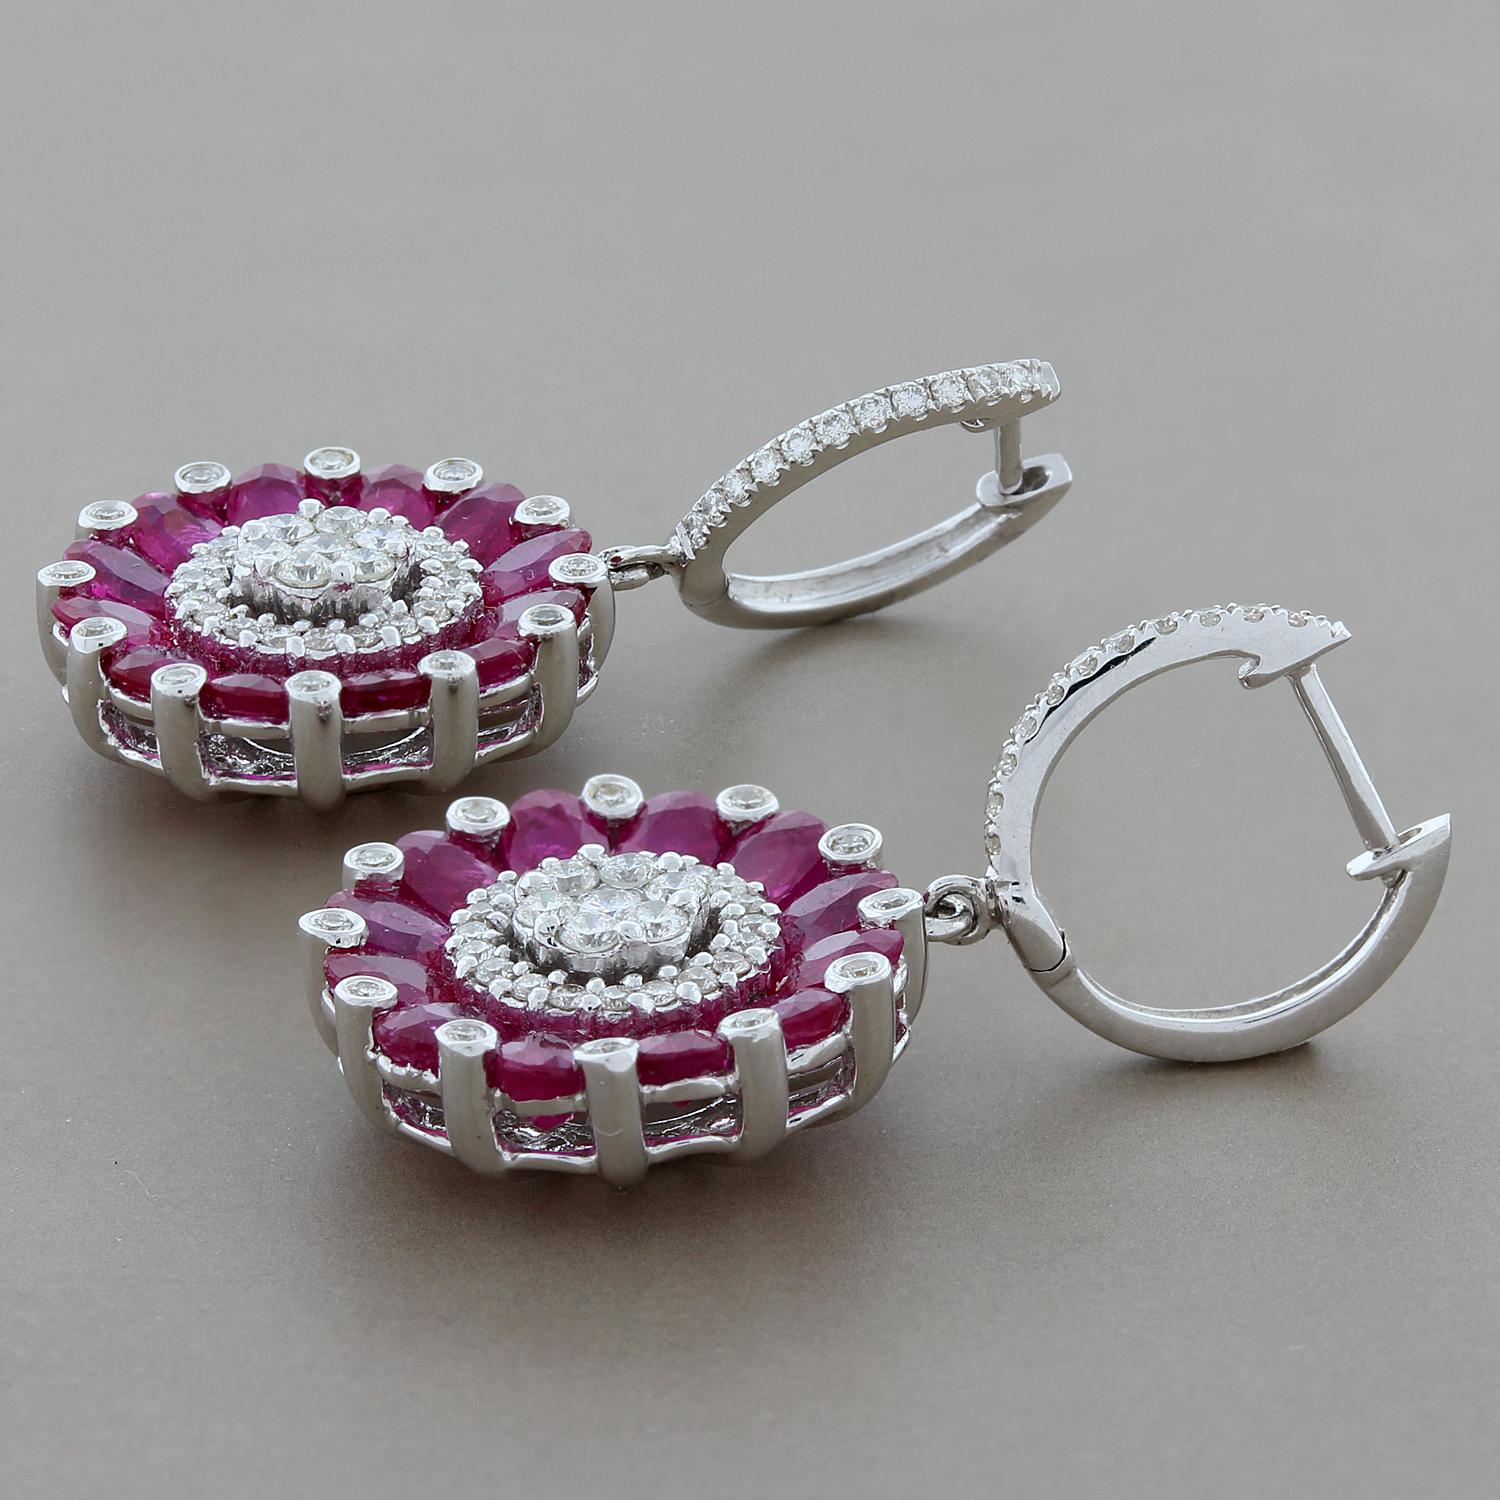 This pair of earrings are fun and glamorous! They feature 4.26 carats of oval cut rubies and 0.76 carats of VS quality round cut diamonds set in 18K white gold. Can be worn everyday or for a night out.

Earring Length: 1.25 inches
Earring Width: